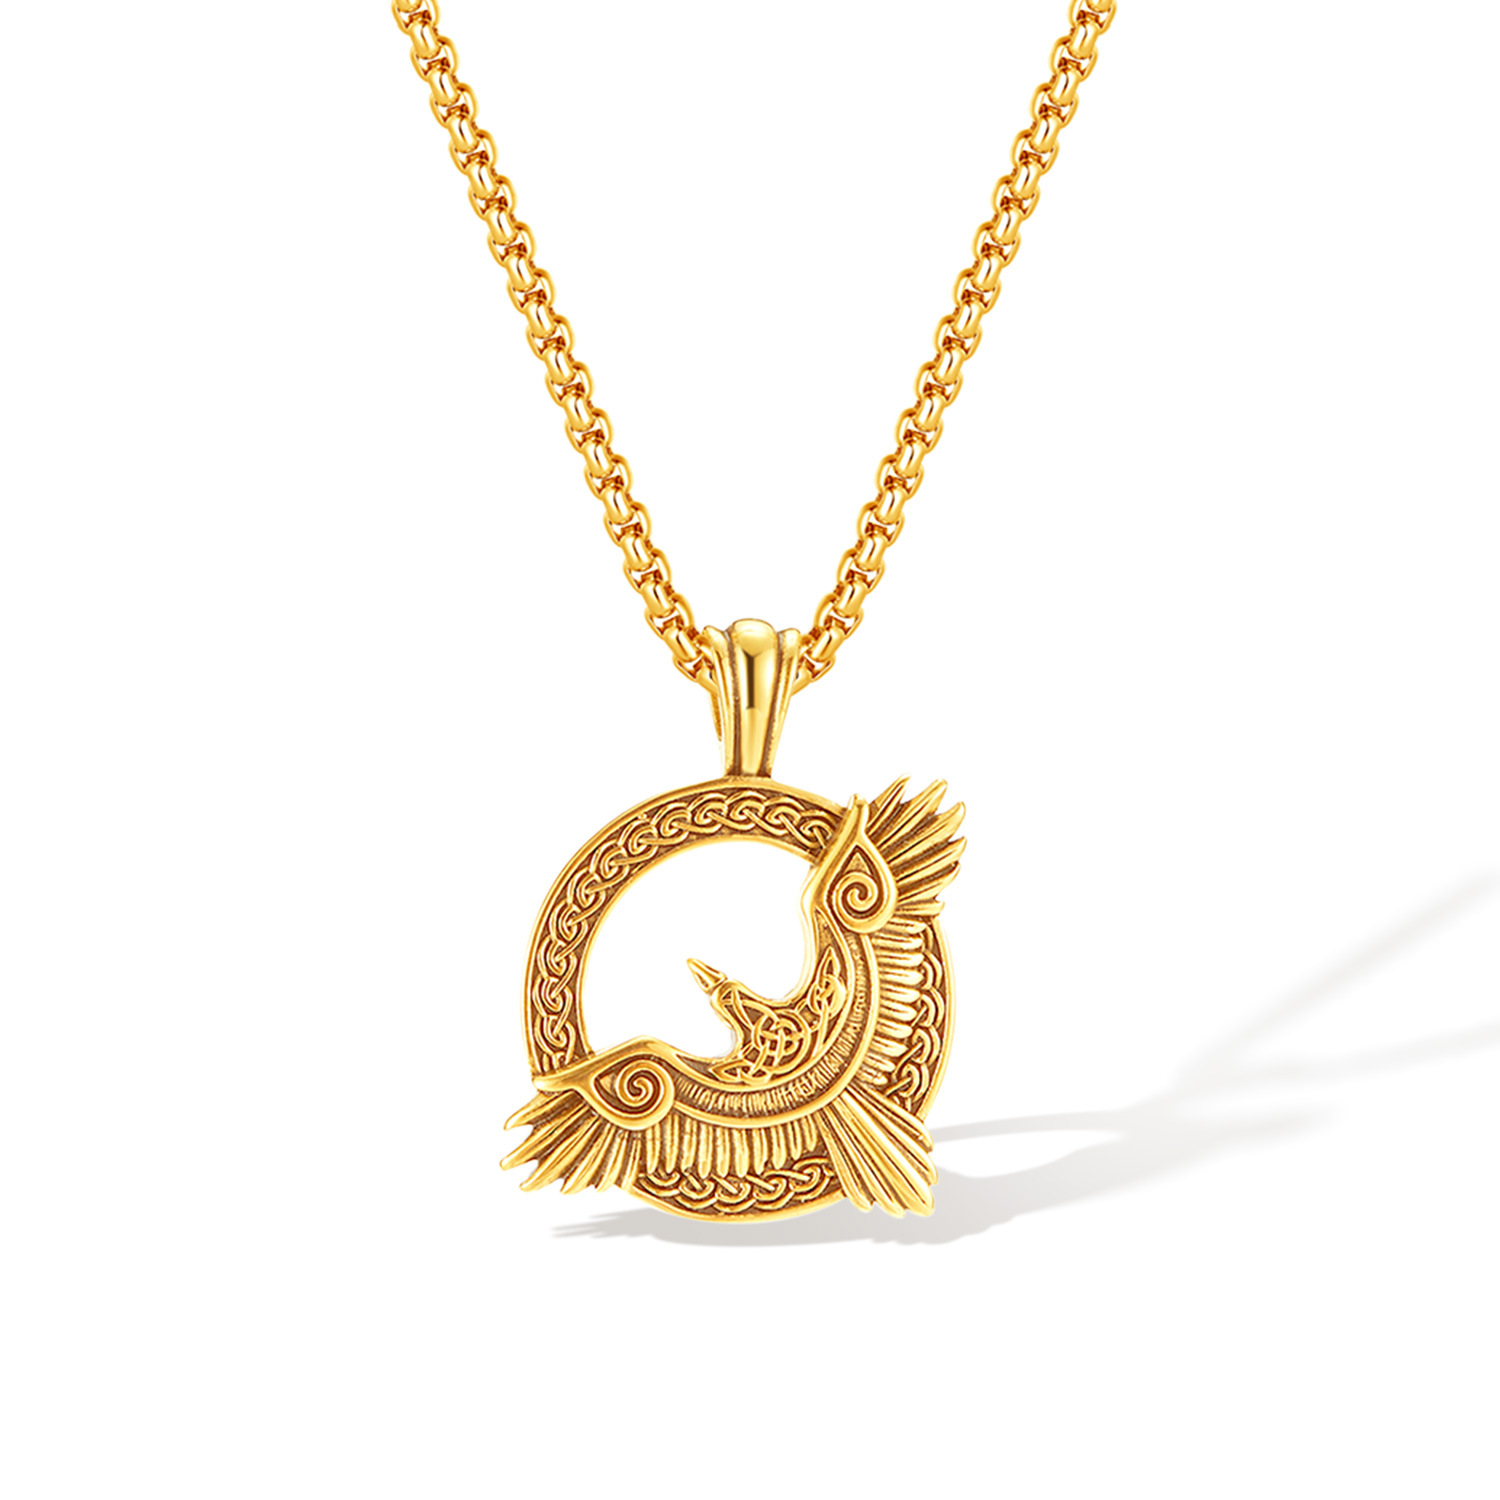 5:Gold pendant with chain 3x55cm